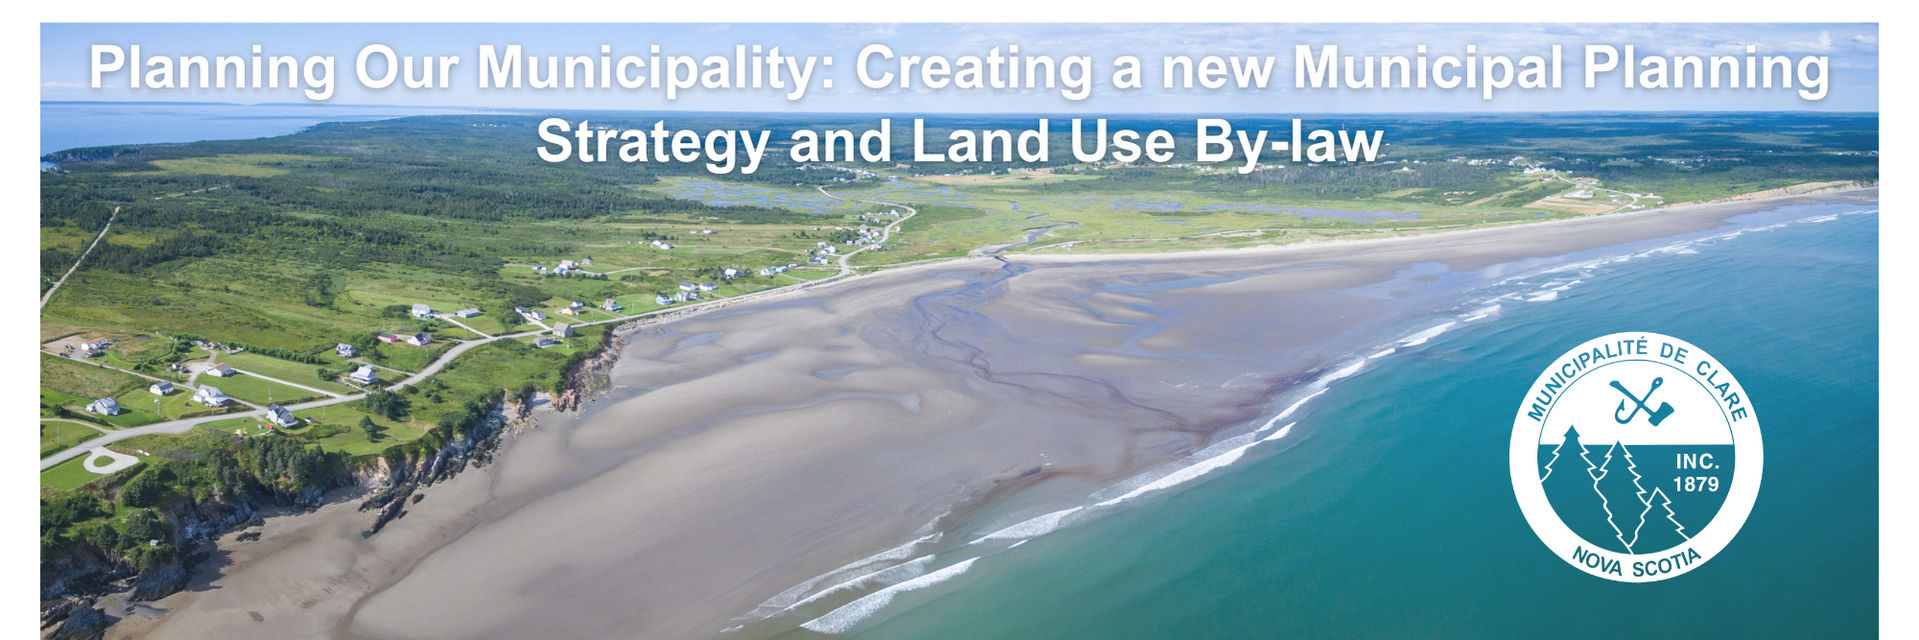 An aerial photo of Mavillette Beach and the text "Planning Our Municipality: Creating a new Municipal Planning Strategy and Land Use By-law"